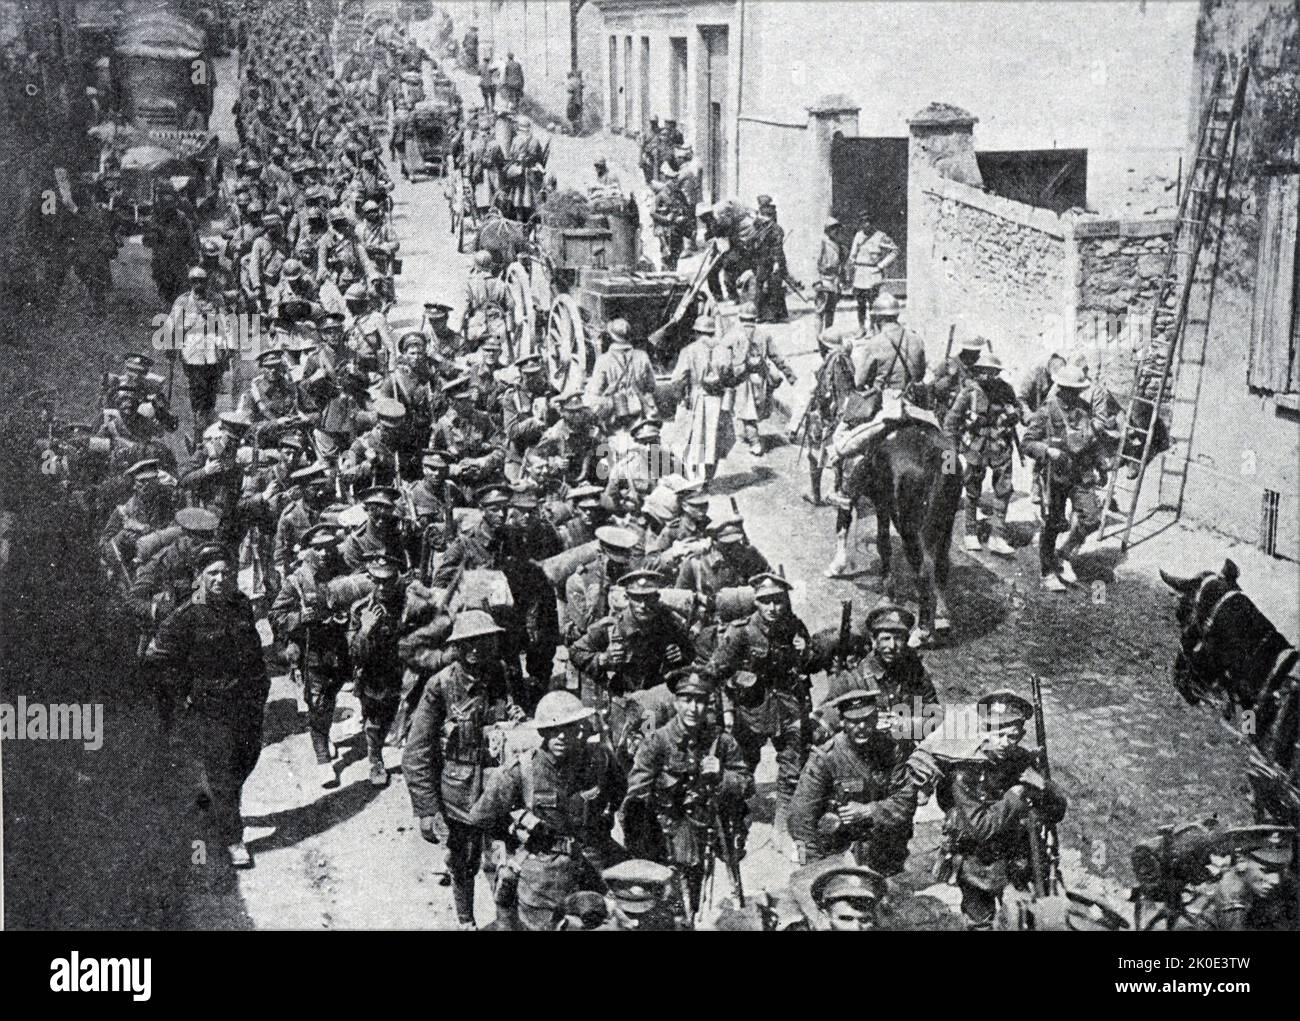 British soldiers on route through the Somme, France, World War I, 1918. Stock Photo